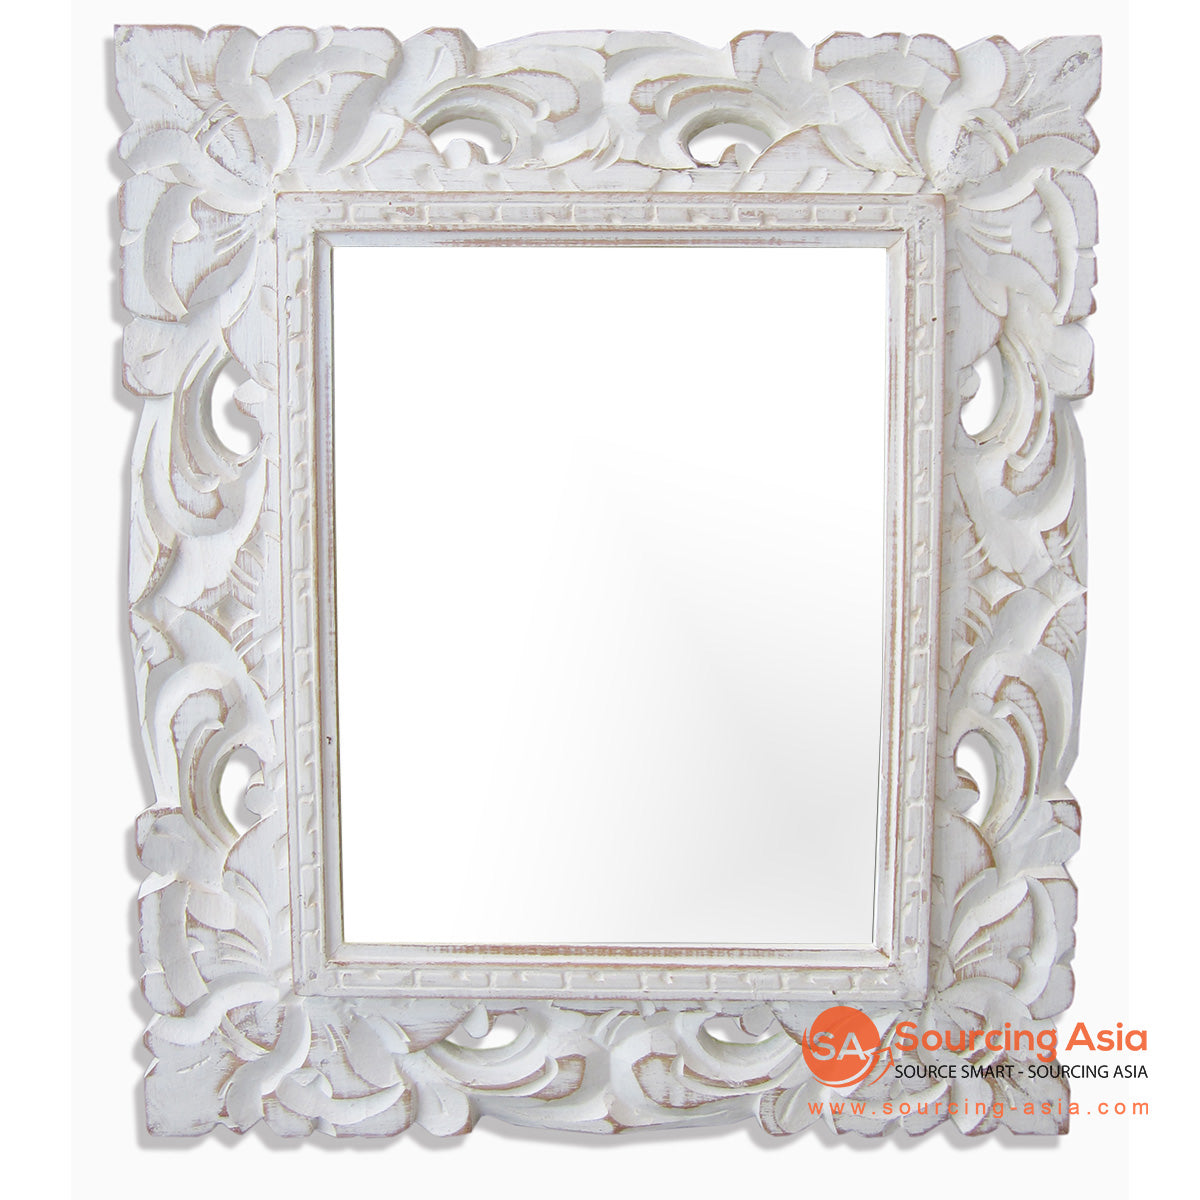 SSU022WW-33X38 WHITE WASH WOODEN MIRROR WITH CARVING